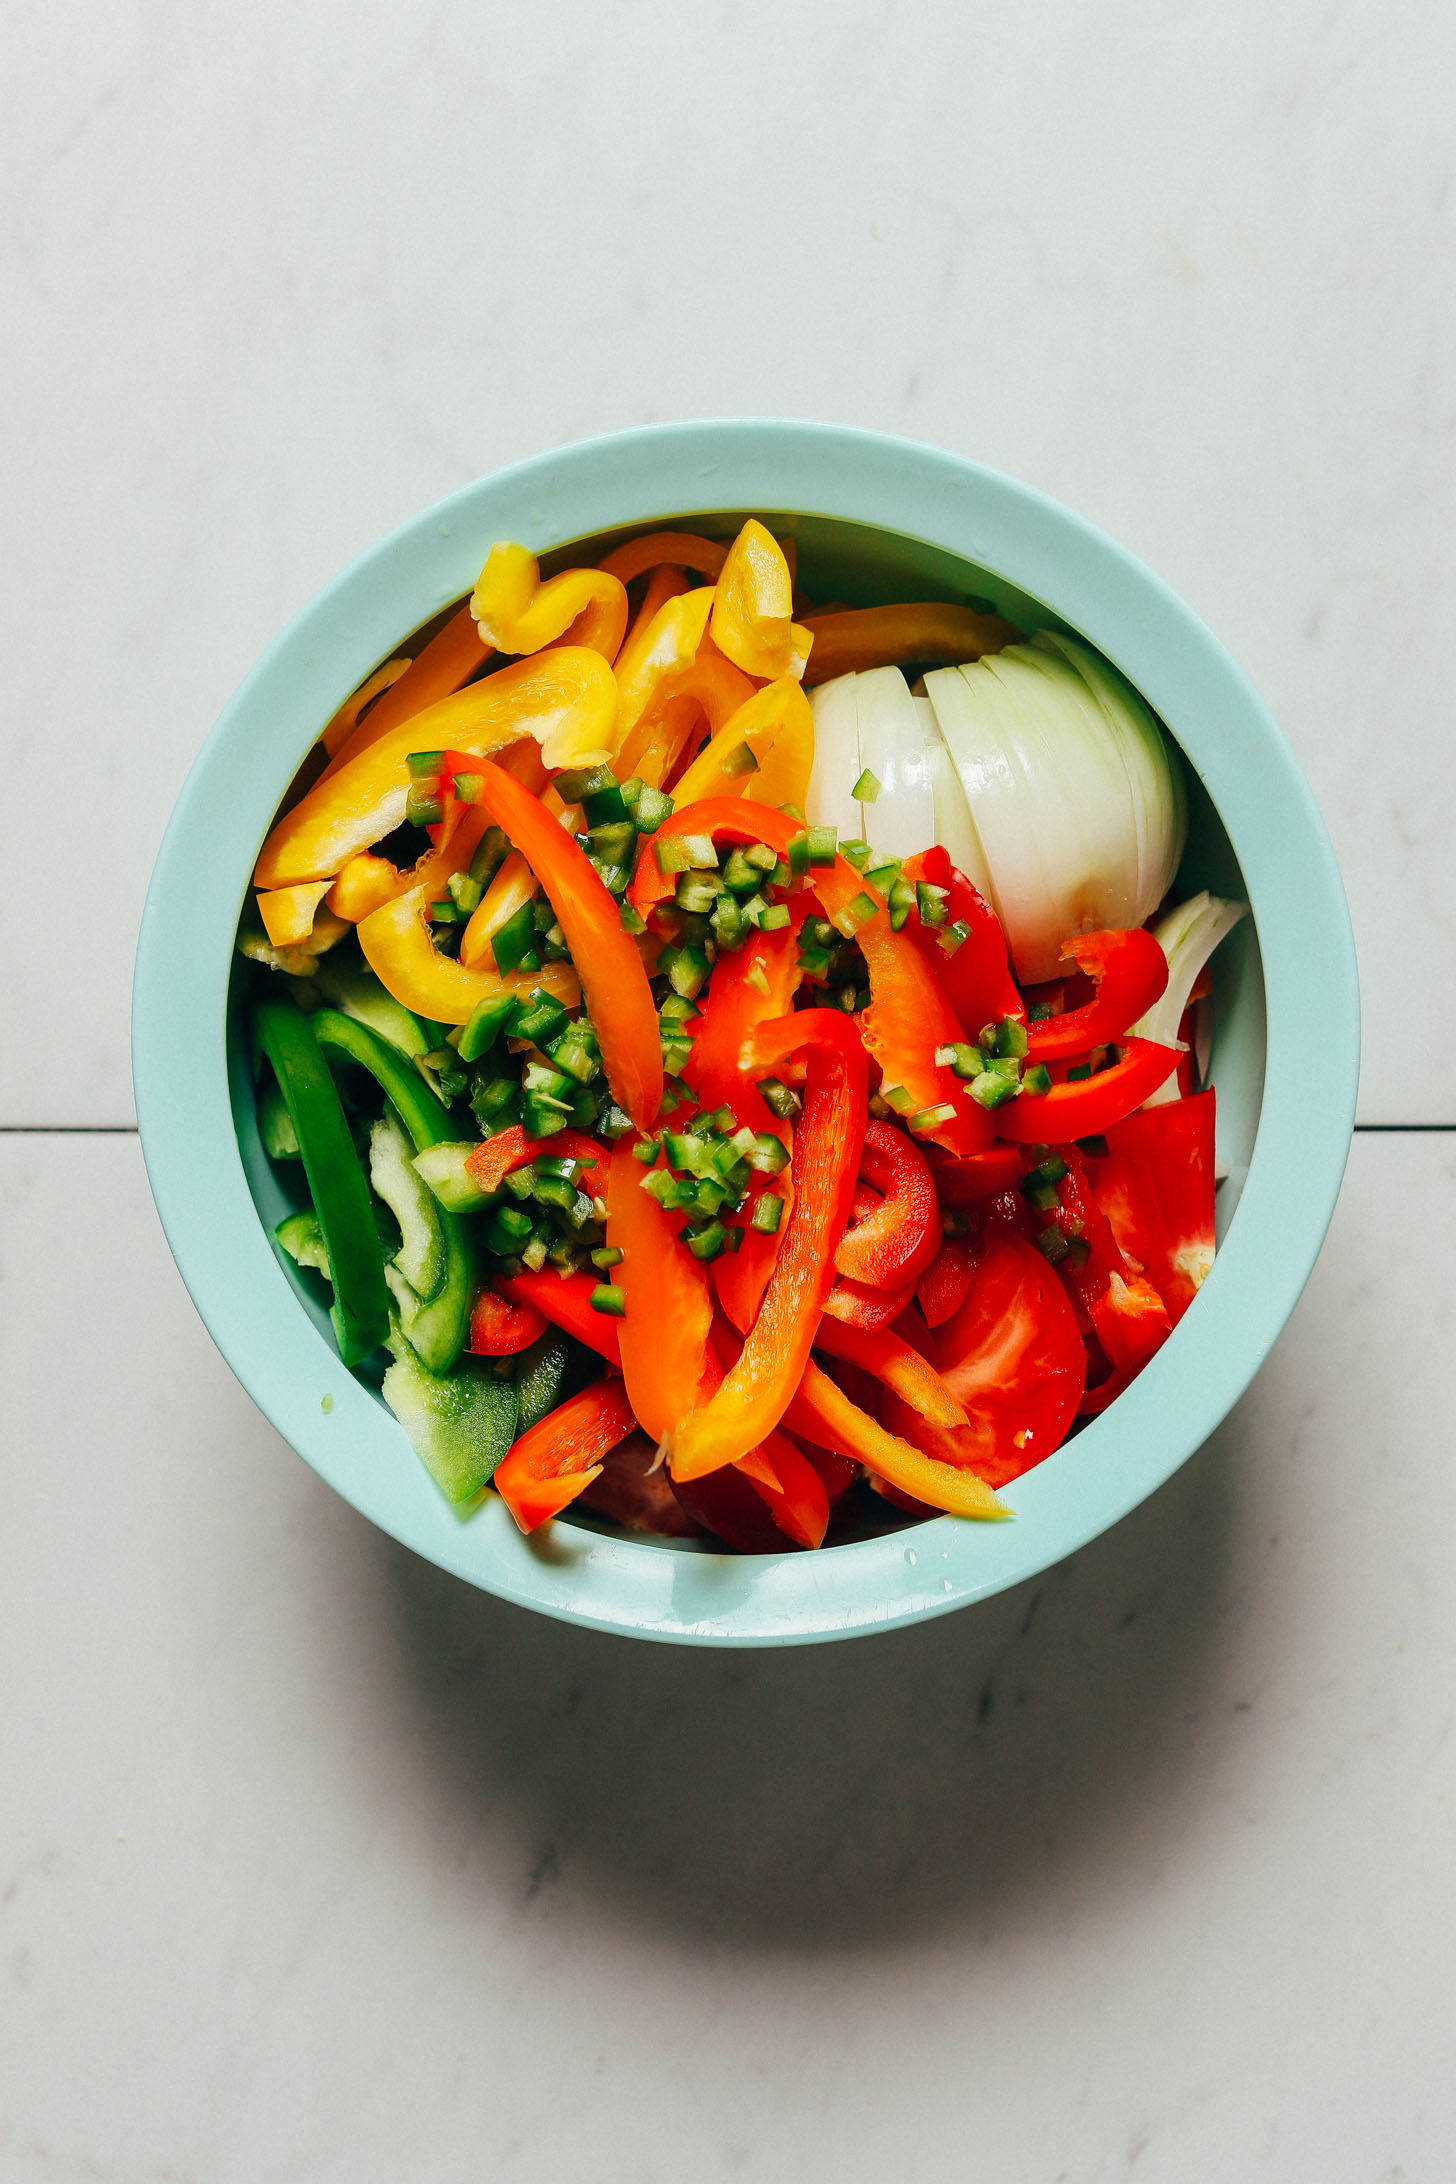 Large bowl filled with sliced vegetables for making our delicious Baked White Fish recipe